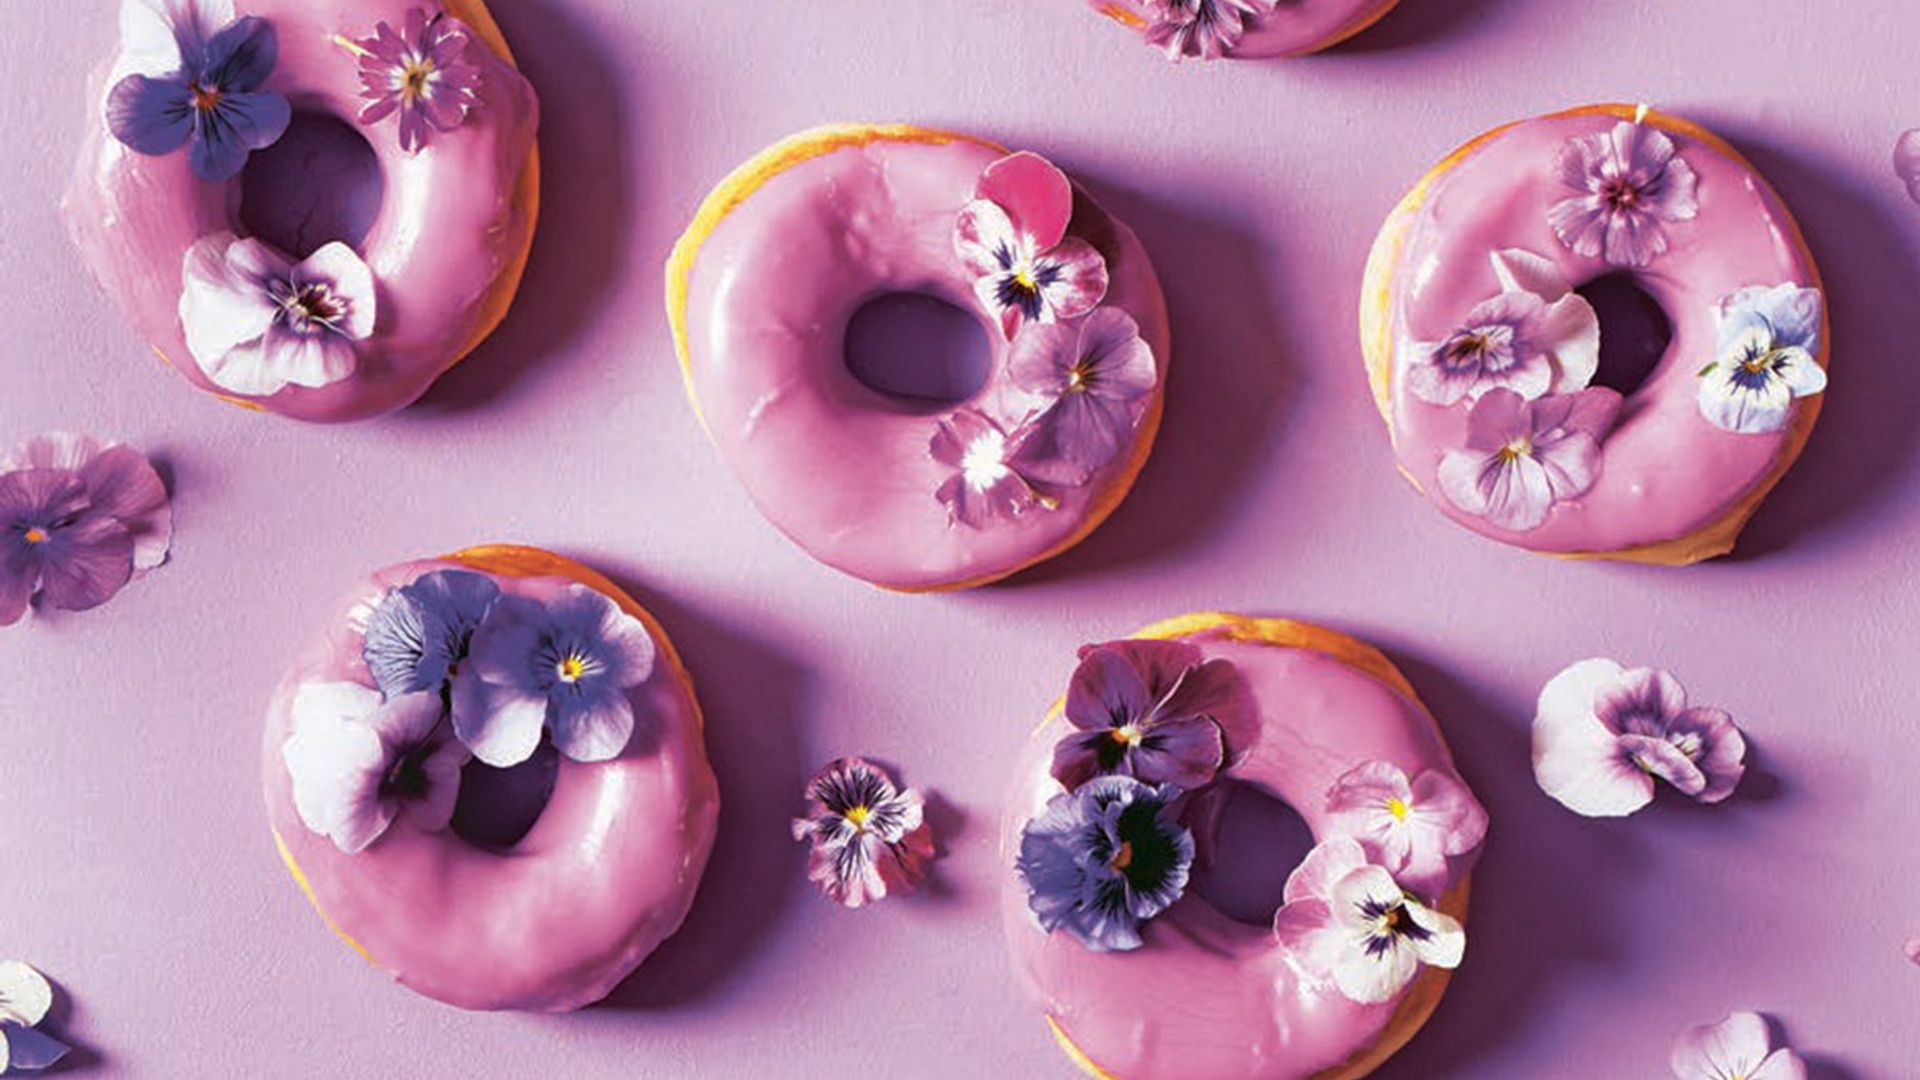 How to make doughnuts: the perfect family lockdown treat!